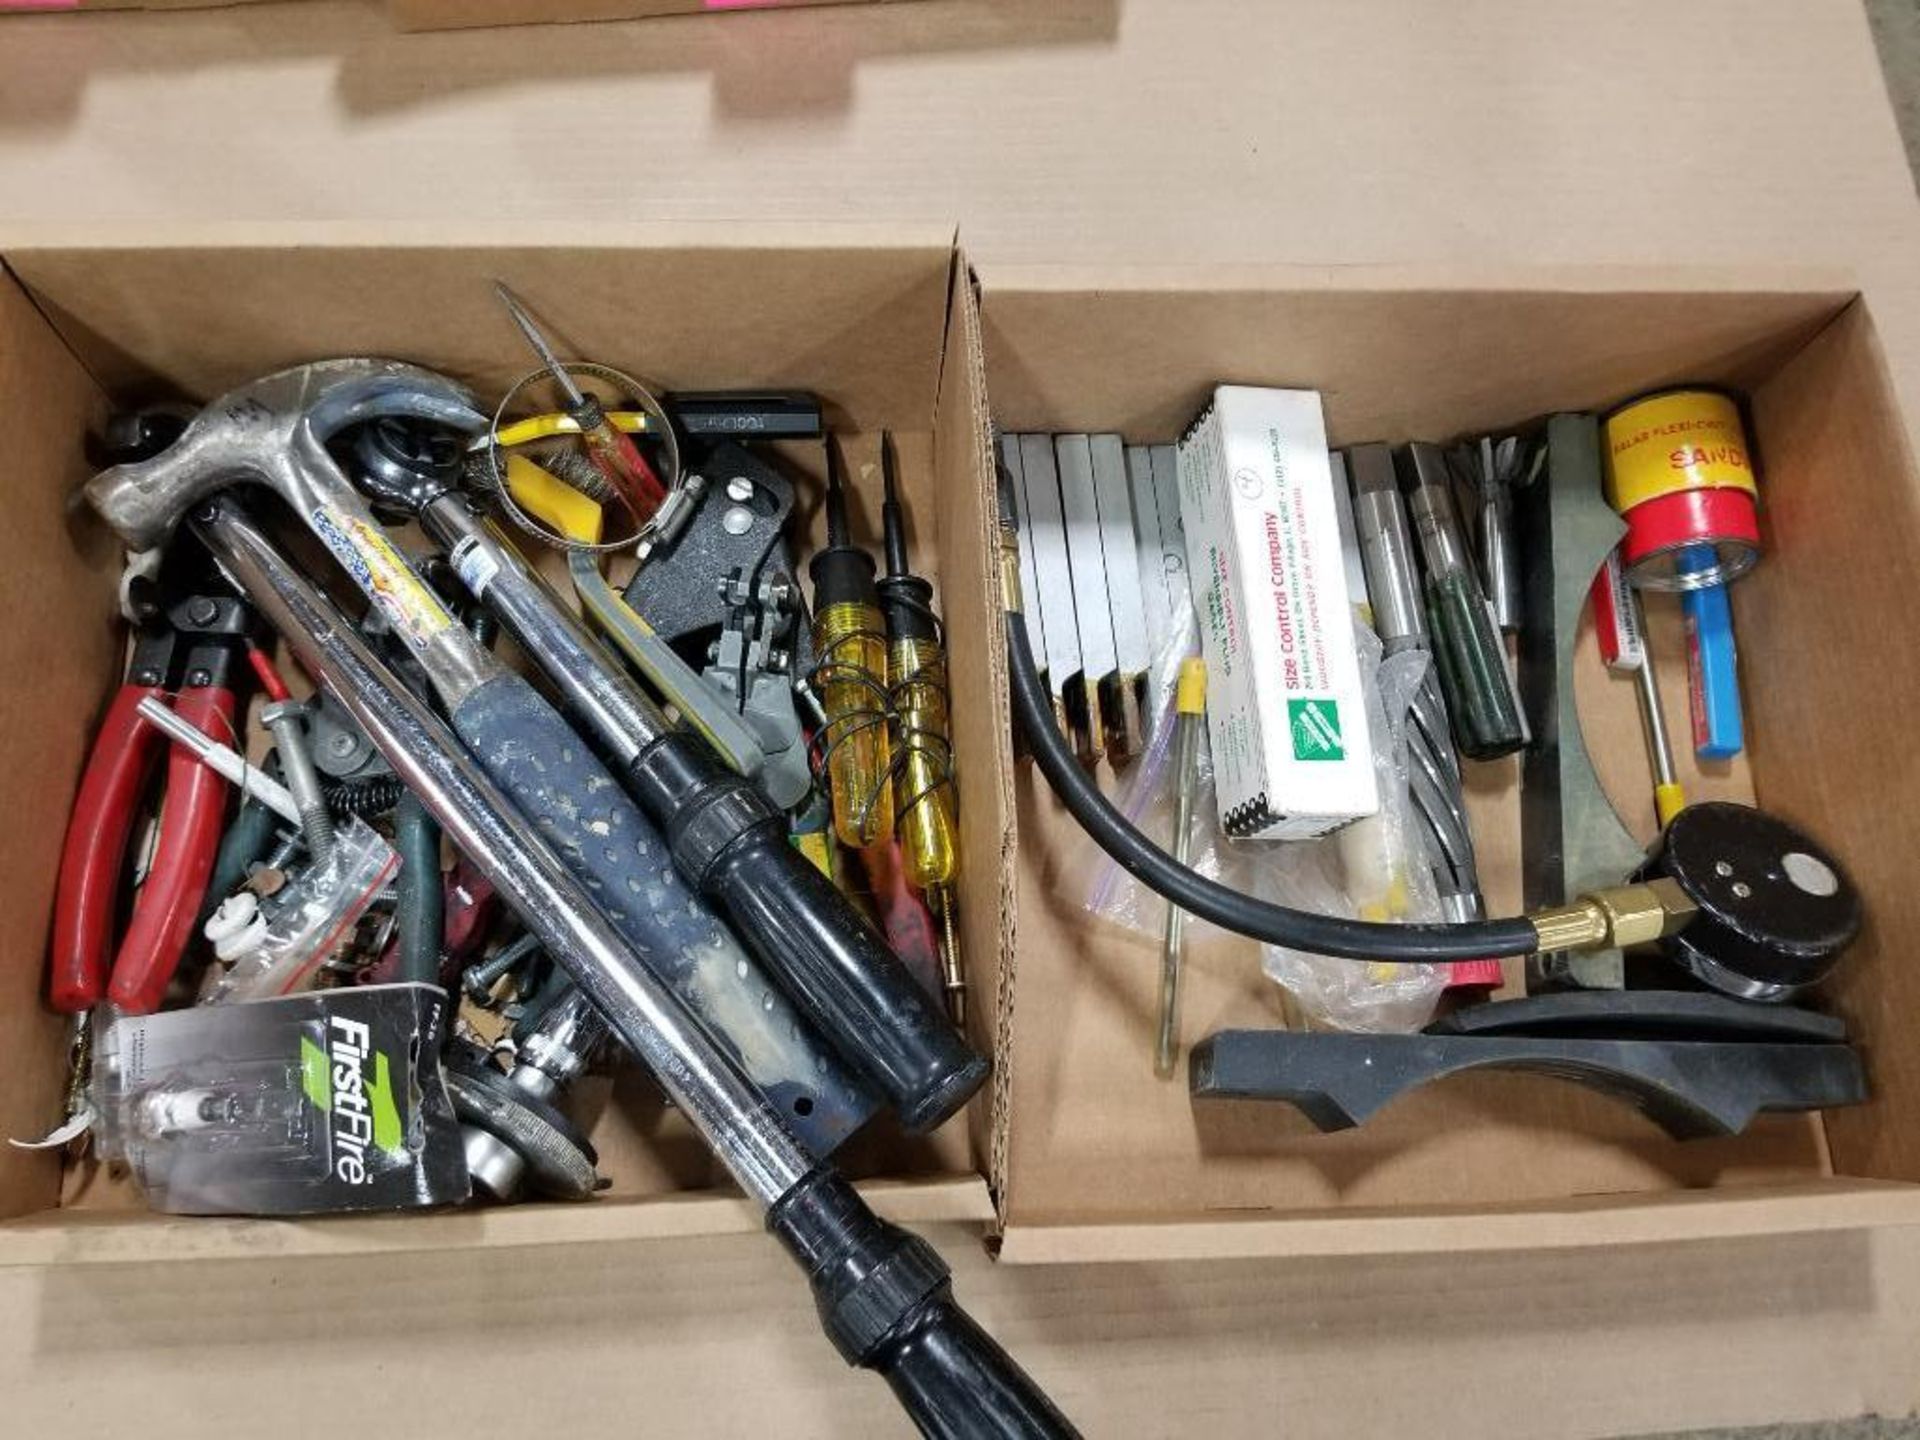 Assorted metalworking tooling, and tools.